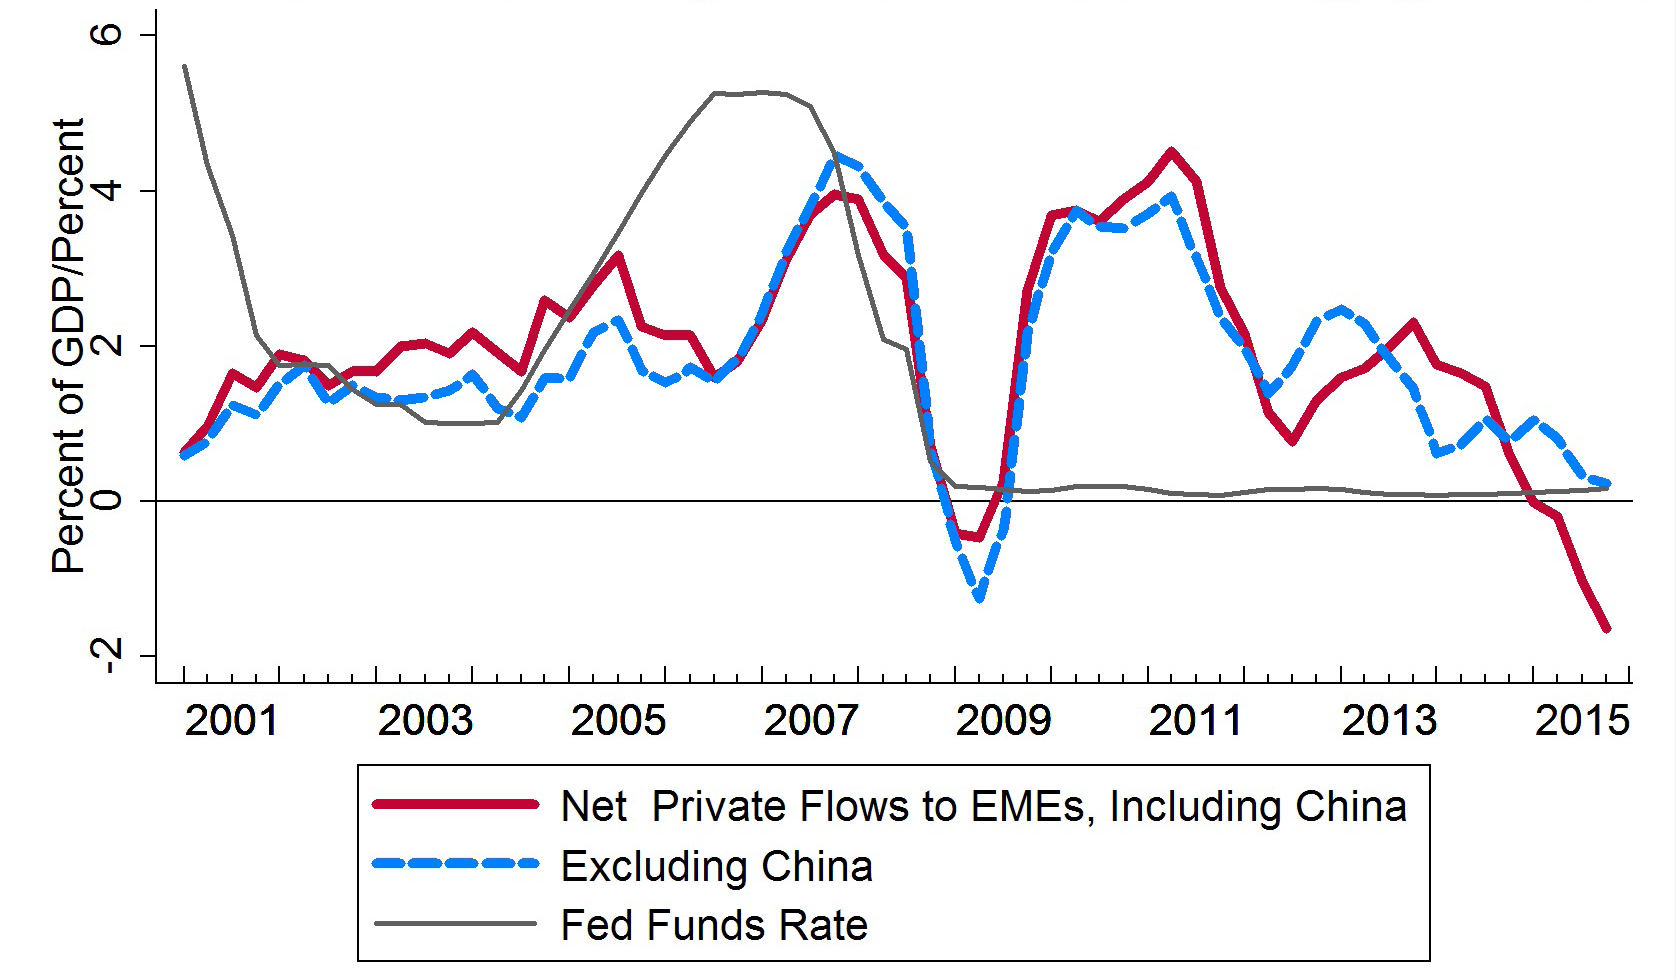 Chart 2: Net Quarterly Private Flows to Emerging Markets. See accessible link for data.